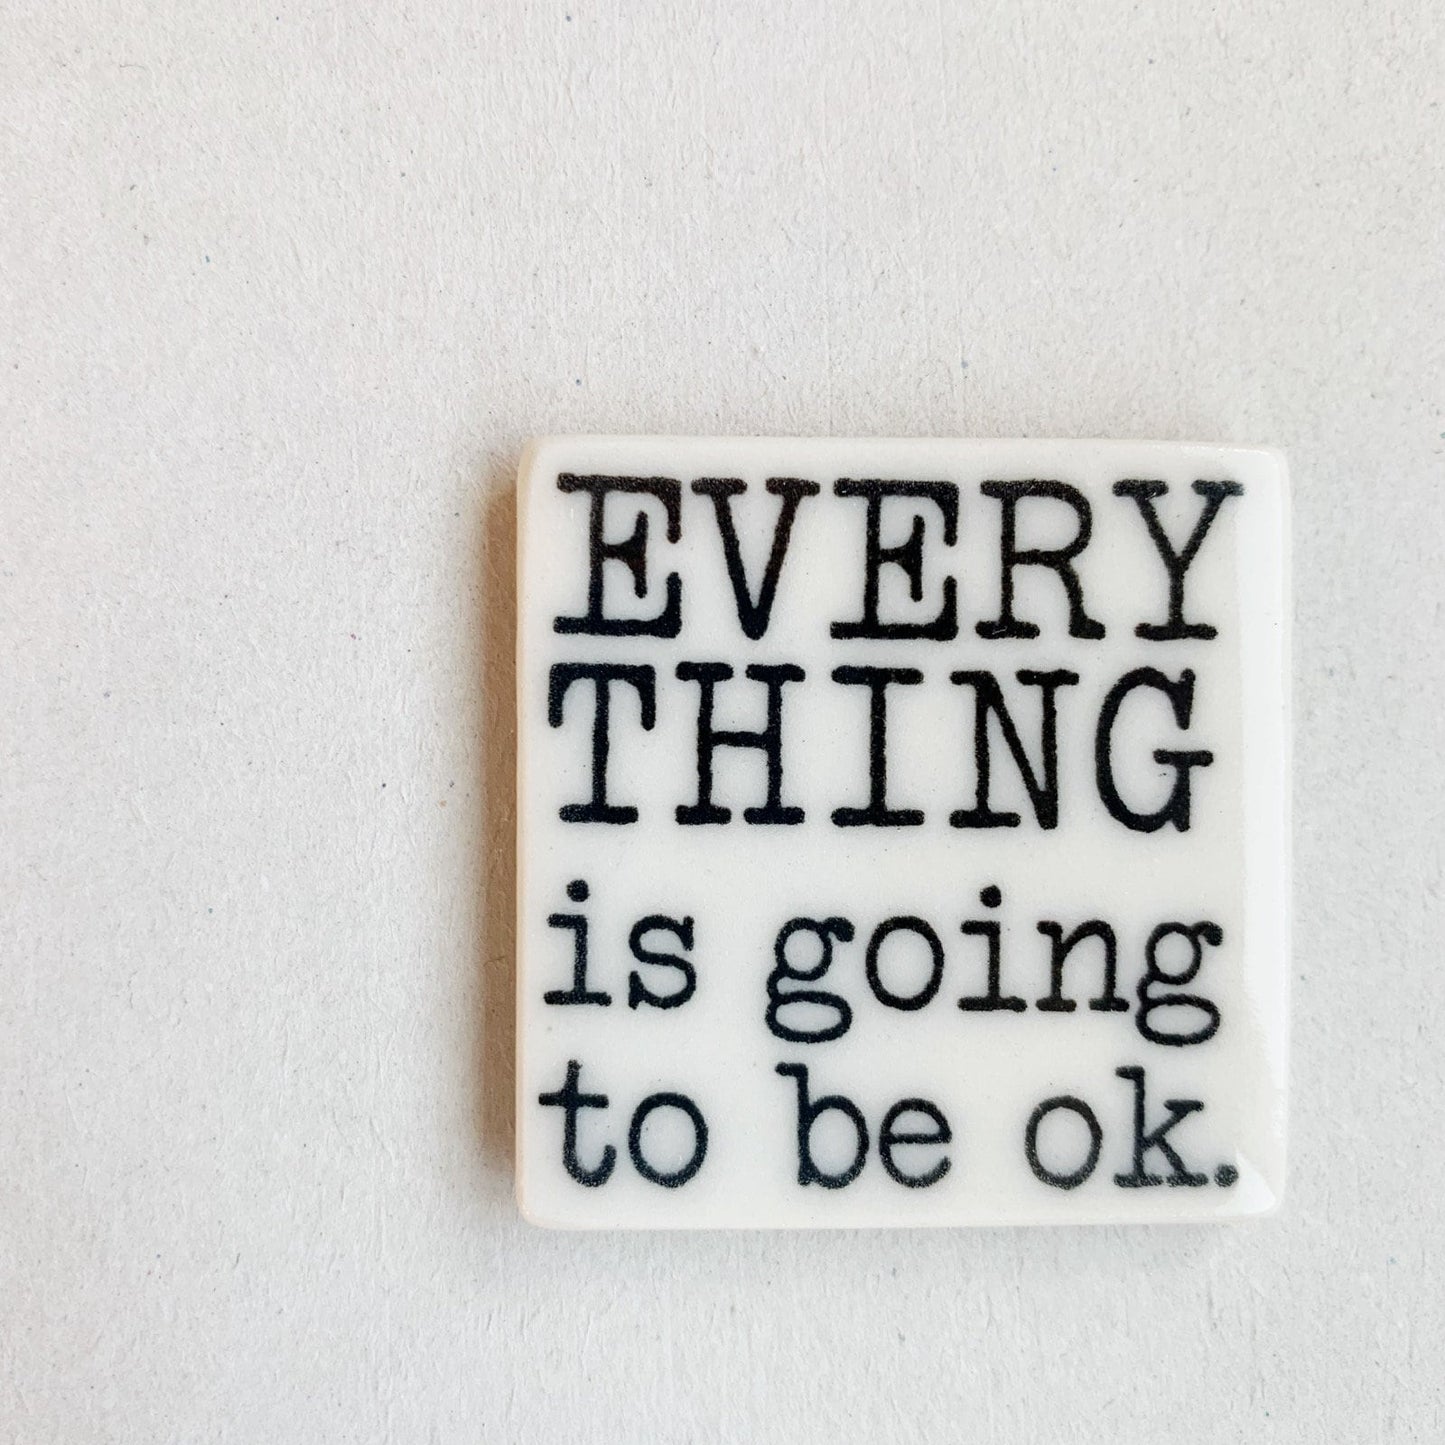 everything is going to be ok ceramic magnet 1.5" w x 1.5" h